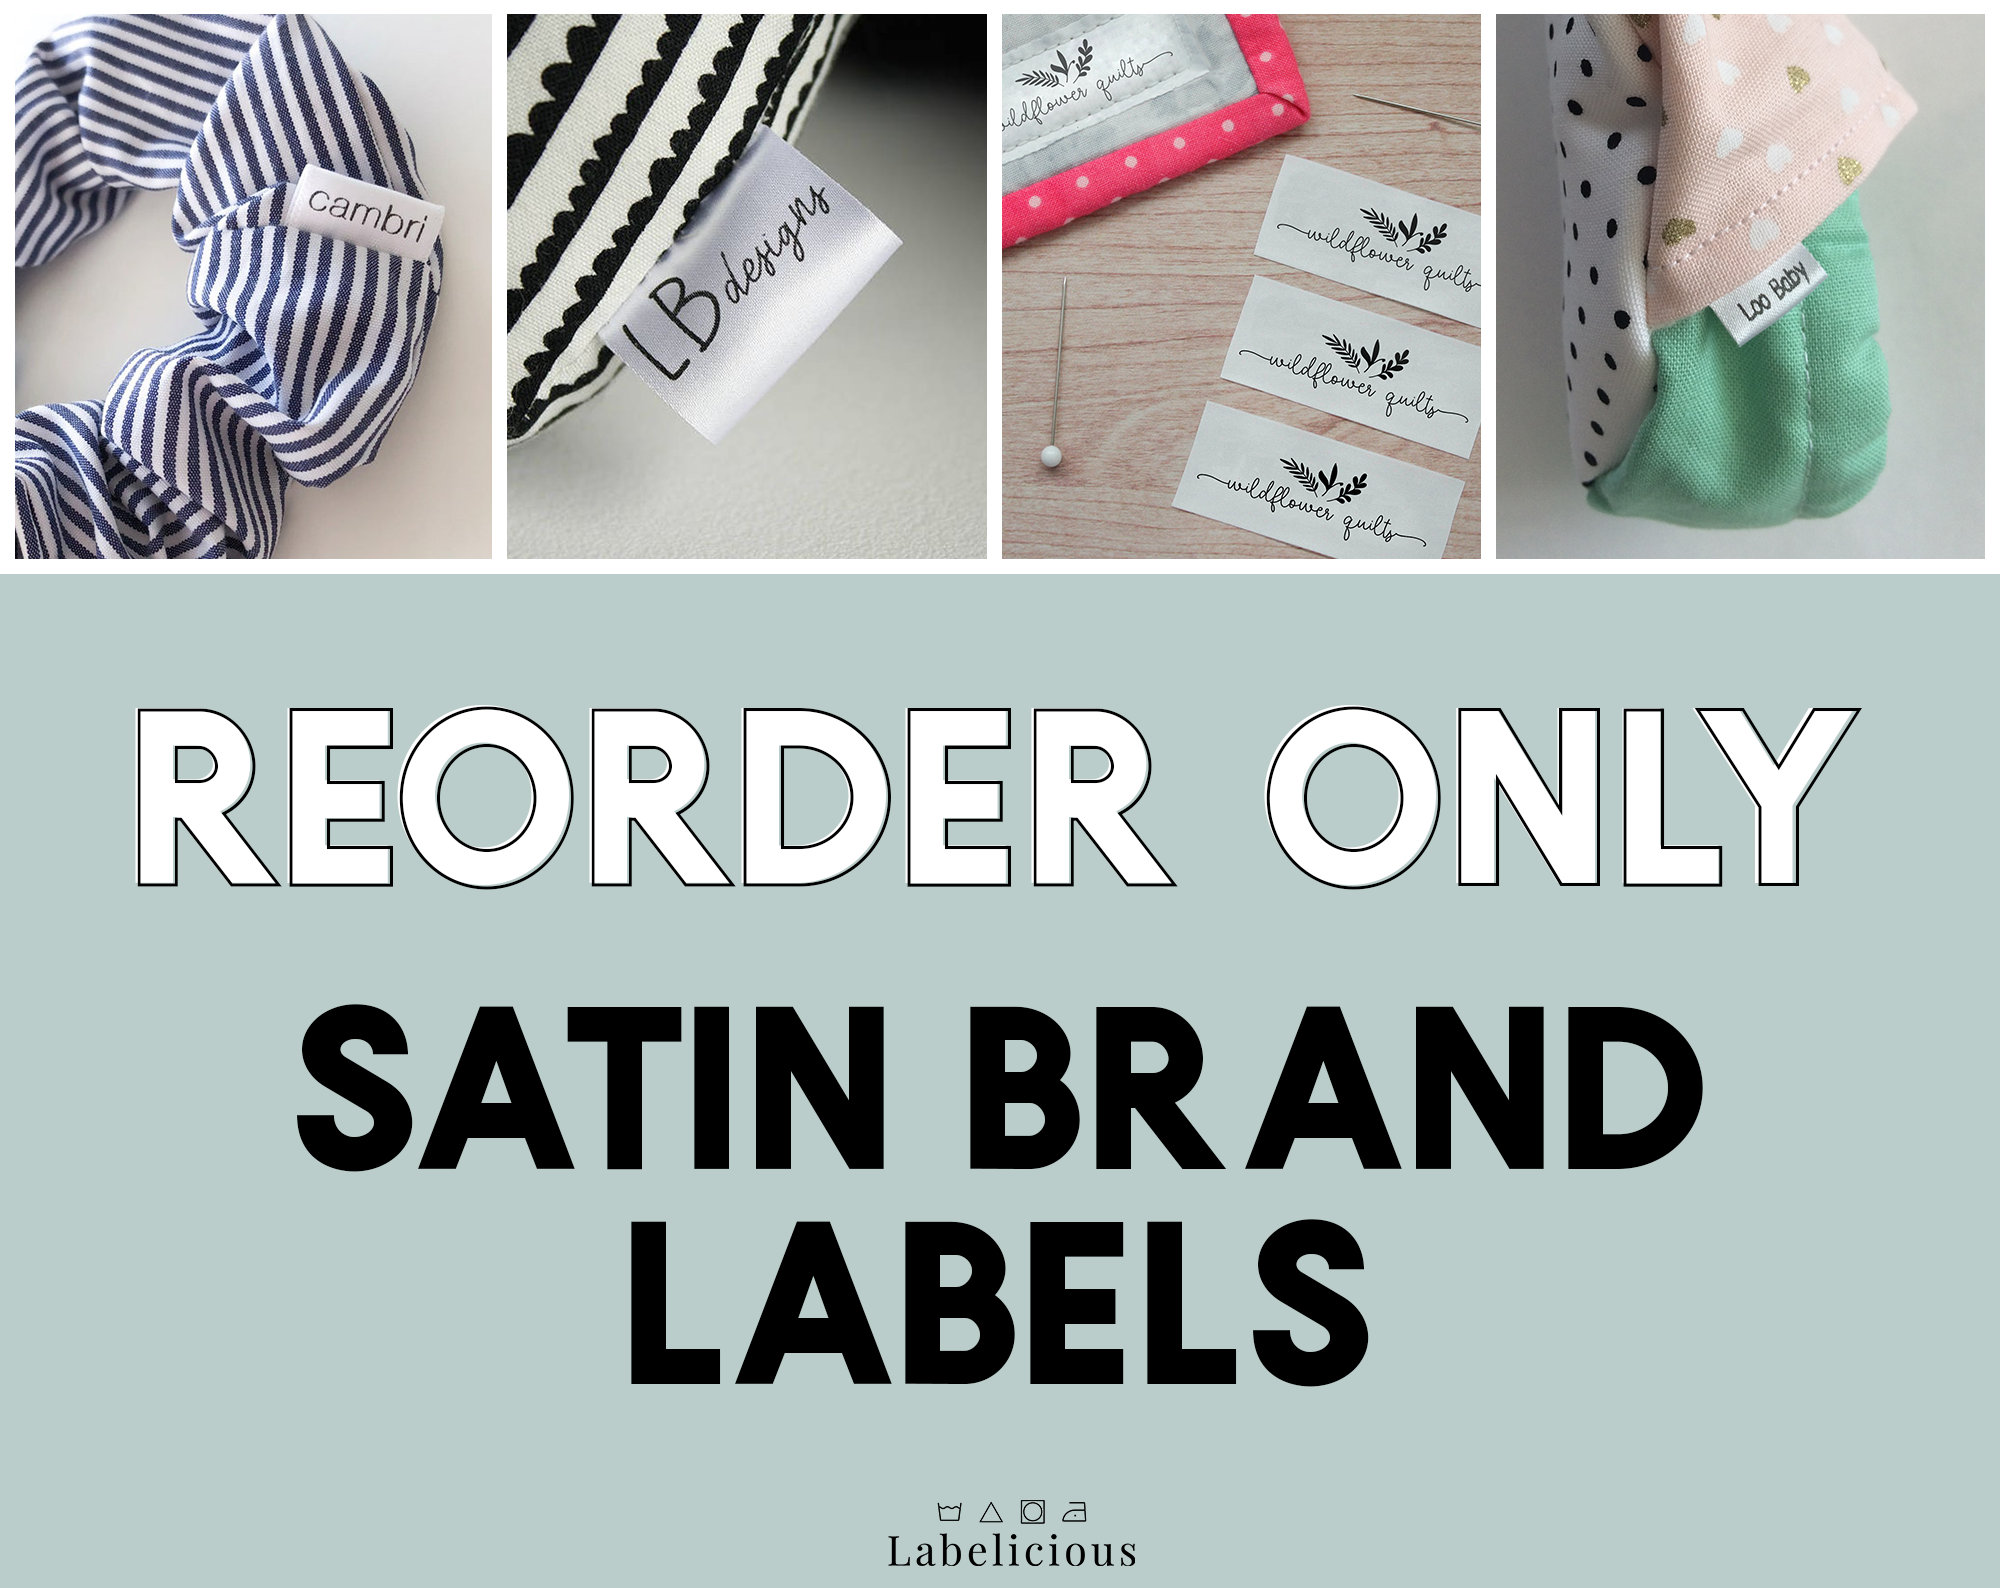 Clothing Labels Sizes Stamp Sets, S M L XL and More Sizes Stamps